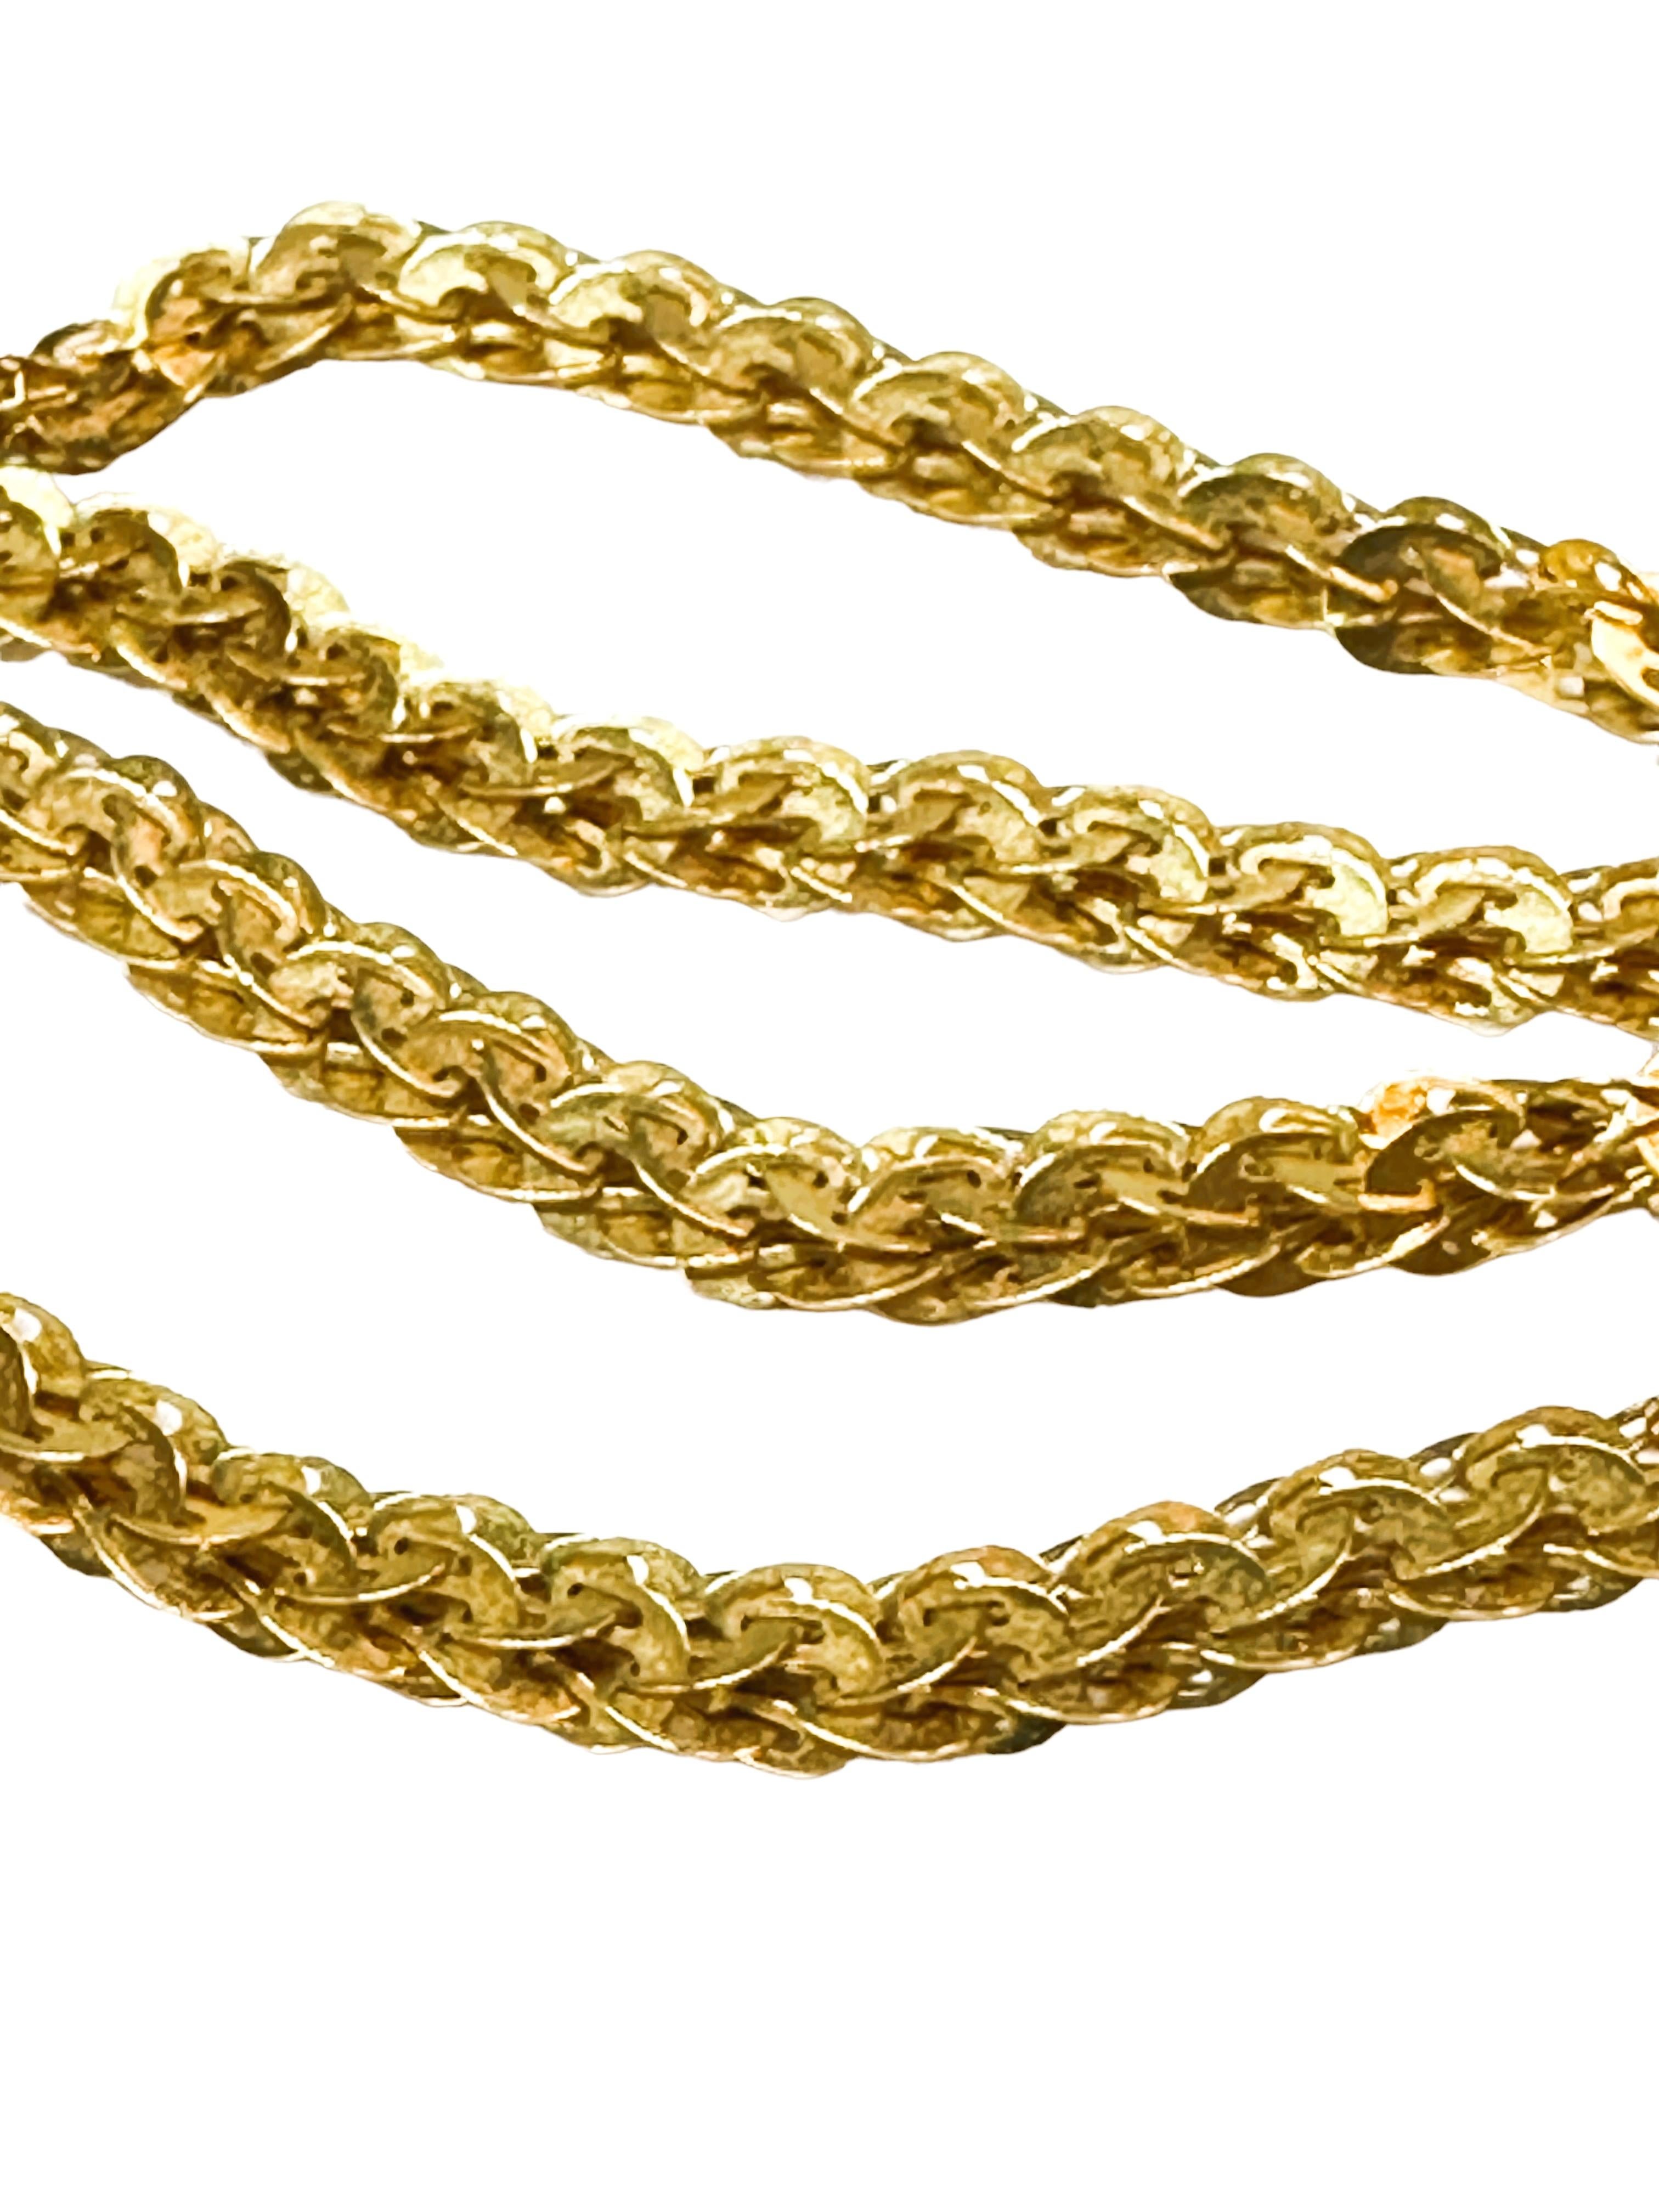 18K Yellow Gold Fancy Link Necklace Chain 16.5 Inches For Sale 4